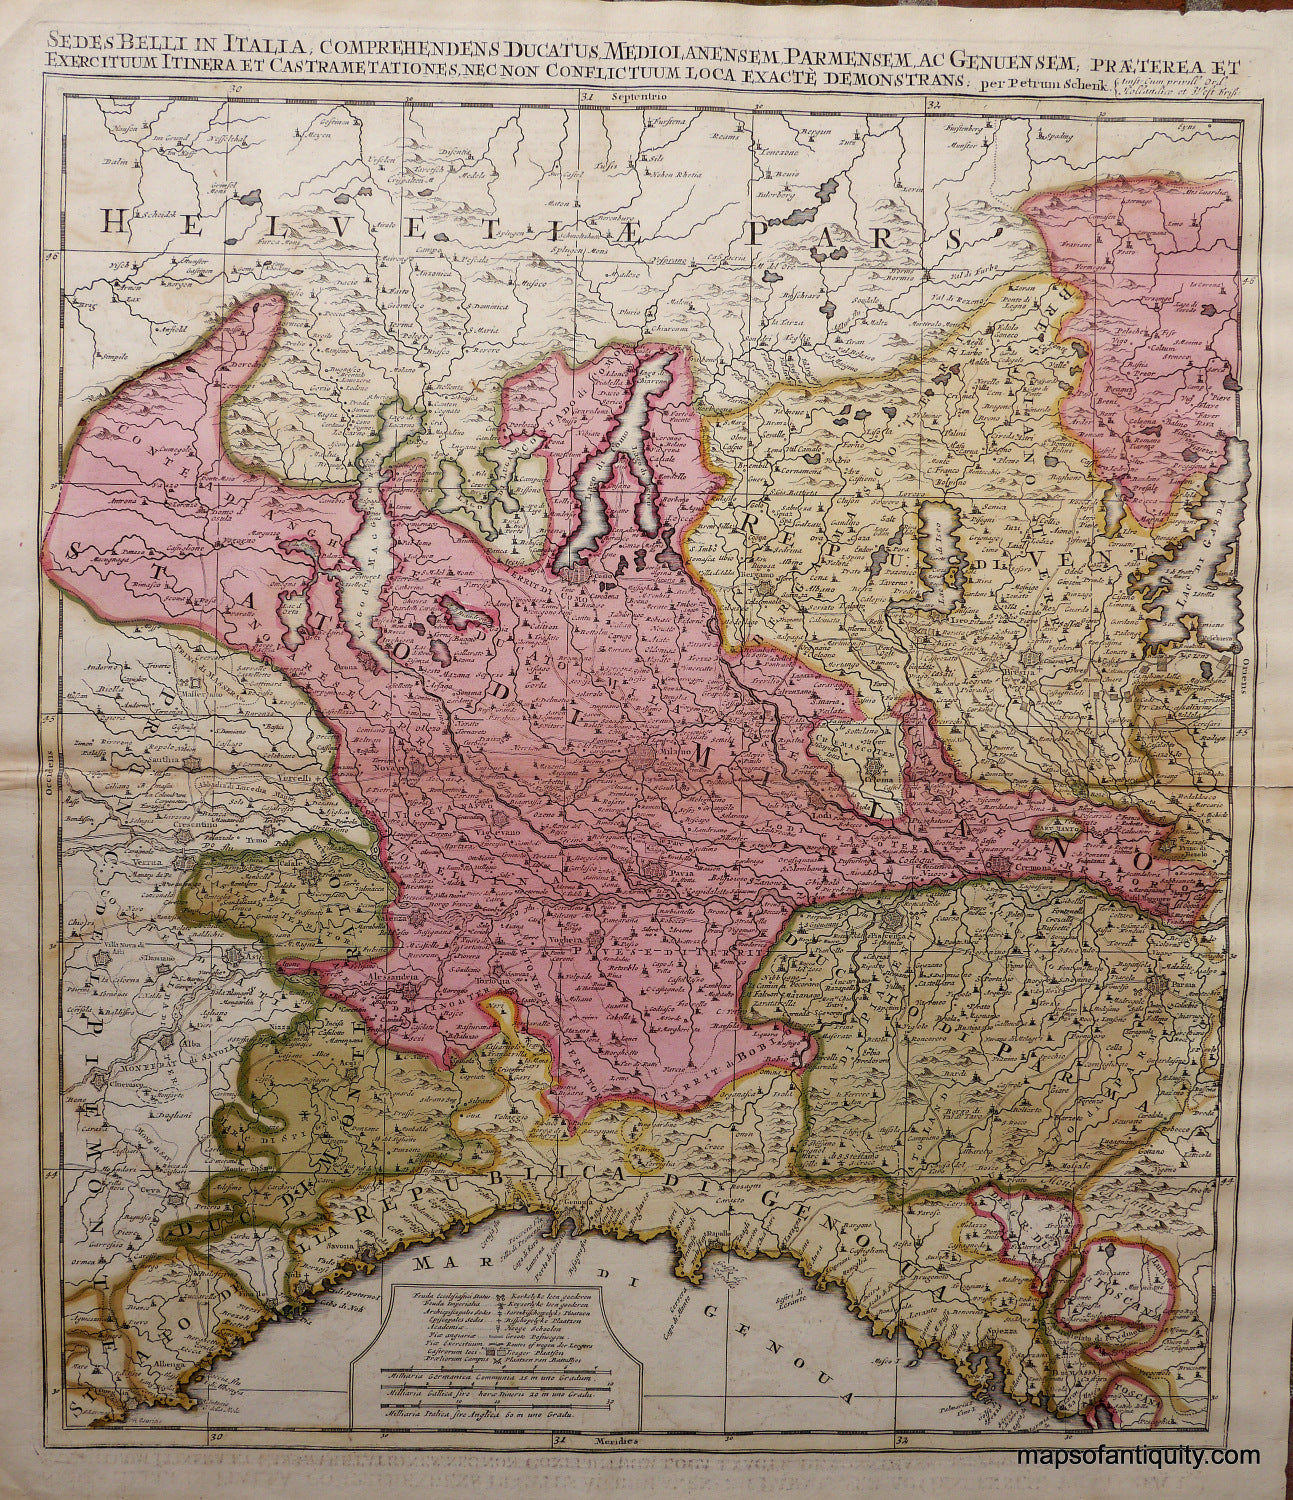 Antique-Hand-Colored-Map-Sedes-Belli-in-ItaliaÃ¢â‚¬Â¦.-Italy-********-Europe-Italy-1704-Schenk-Maps-Of-Antiquity